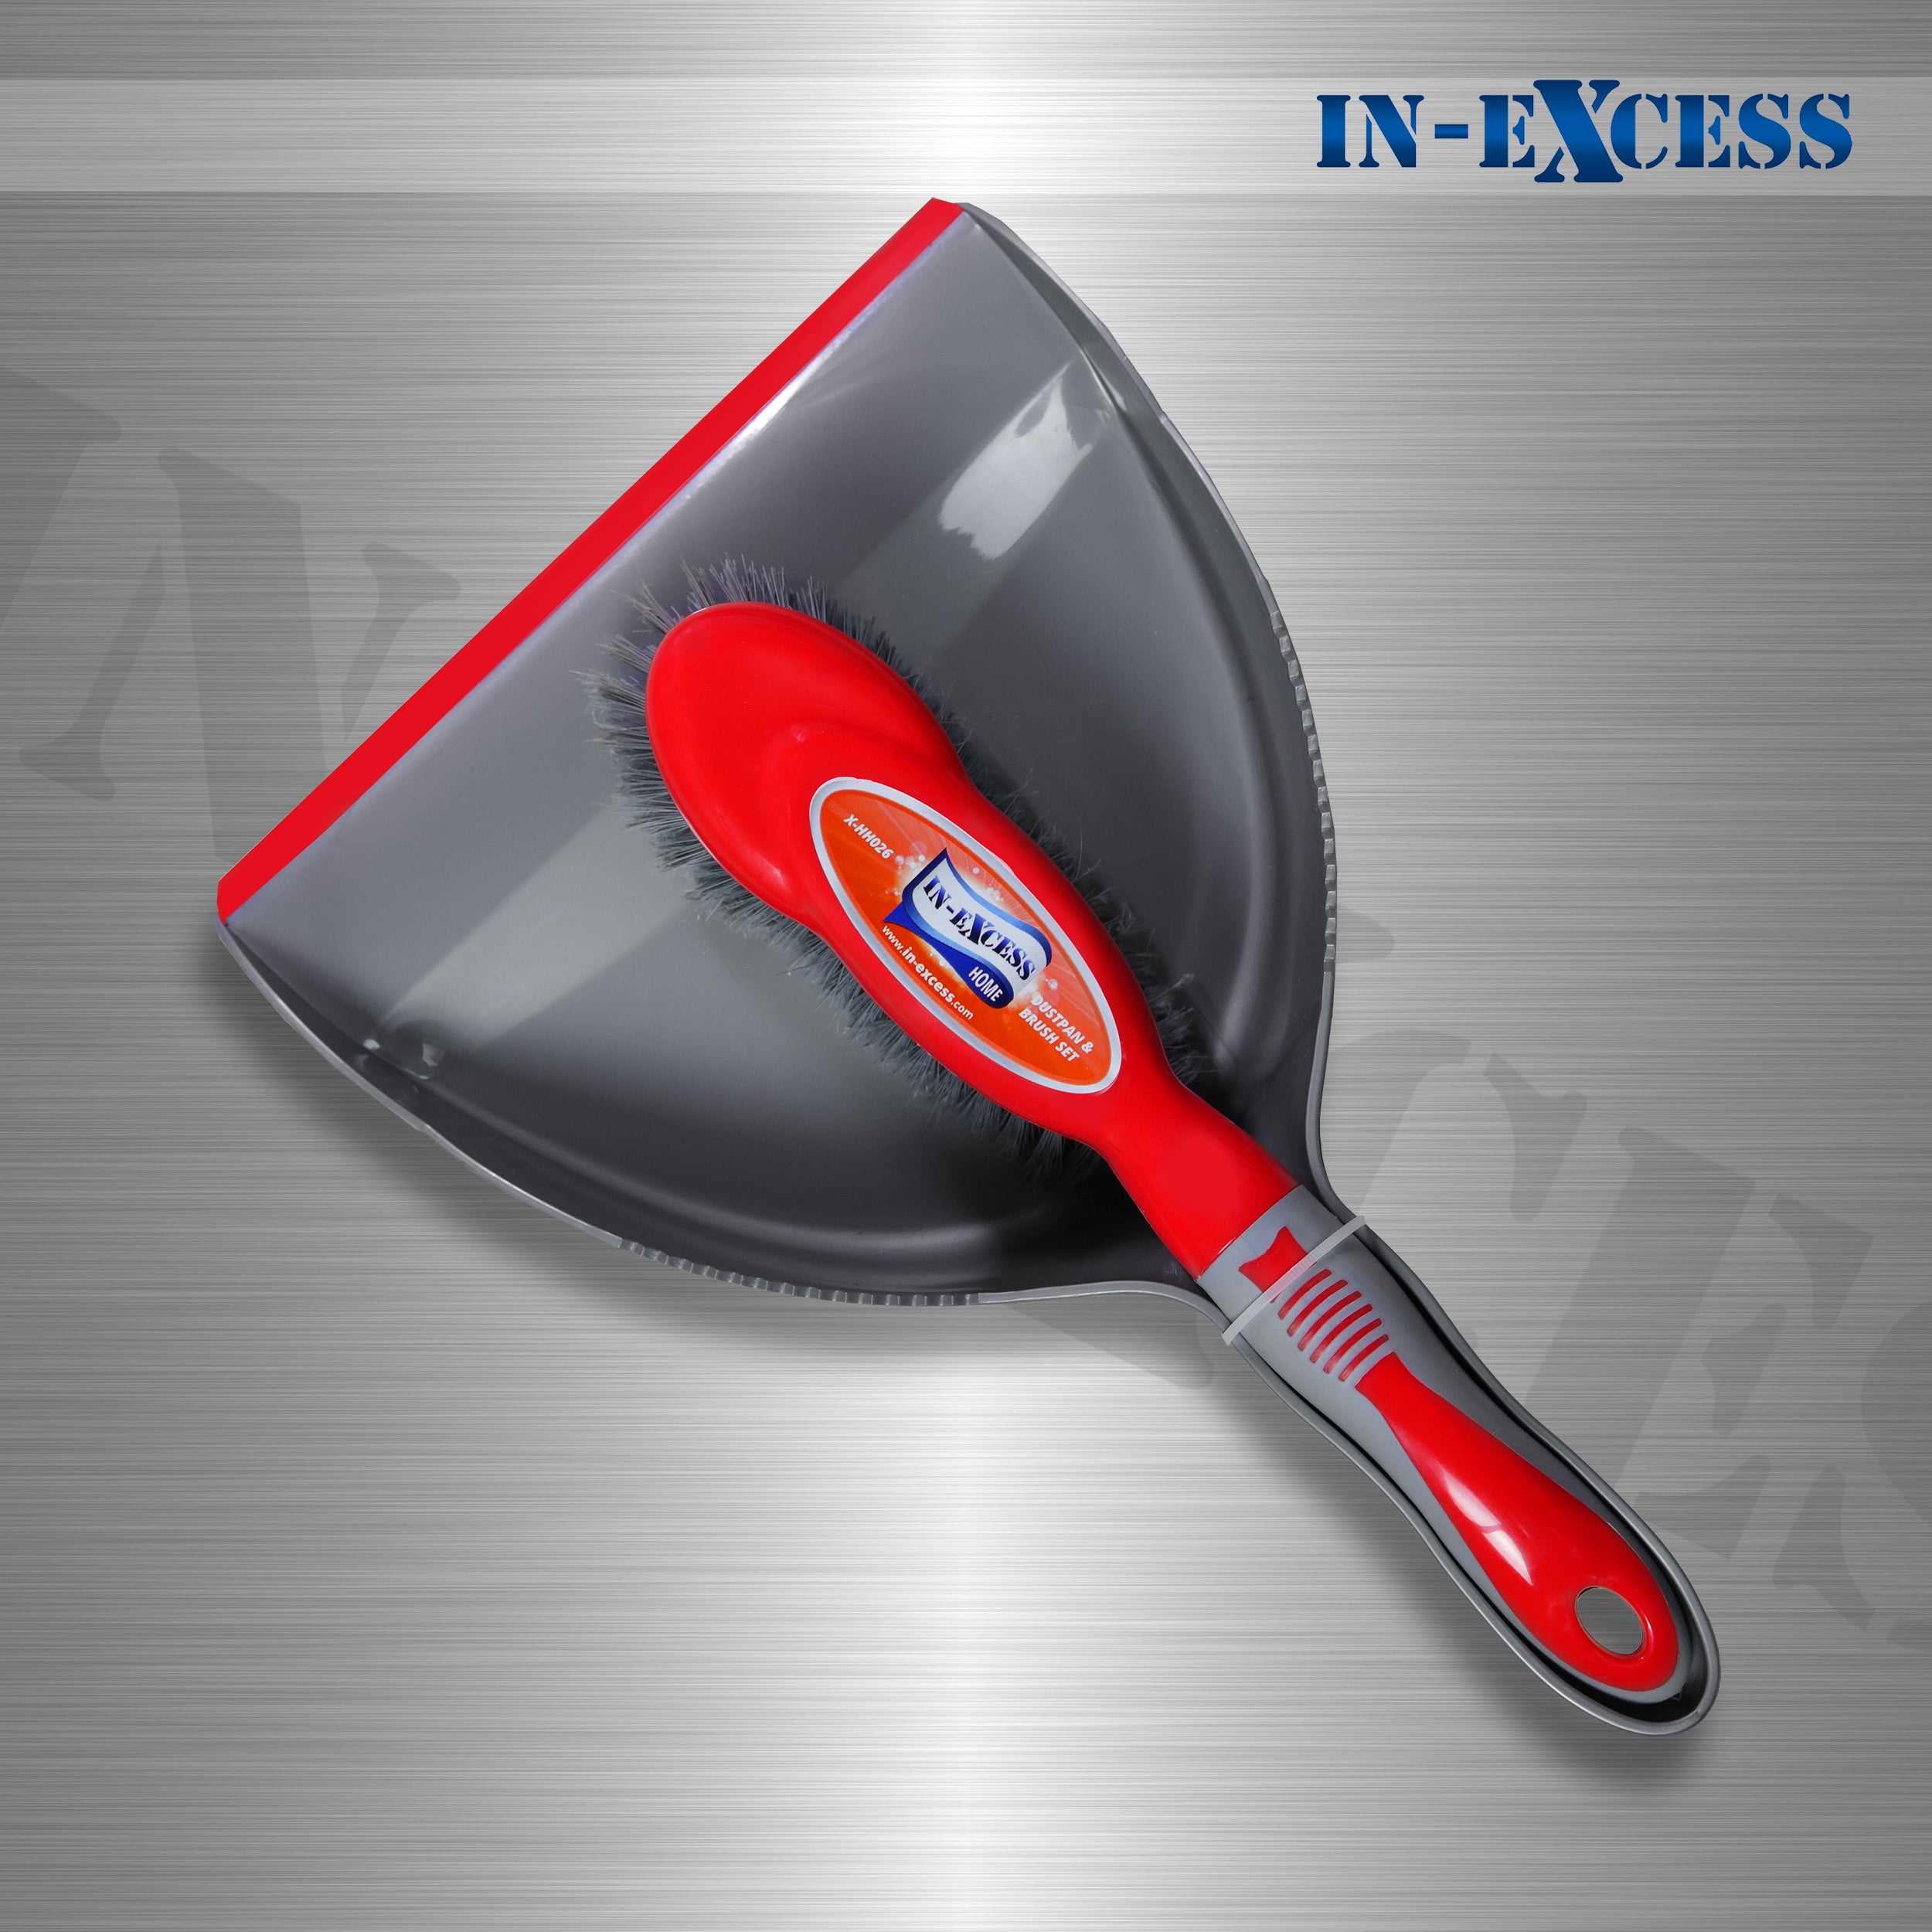 In-Excess Home Dustpan & Brush Set - Red